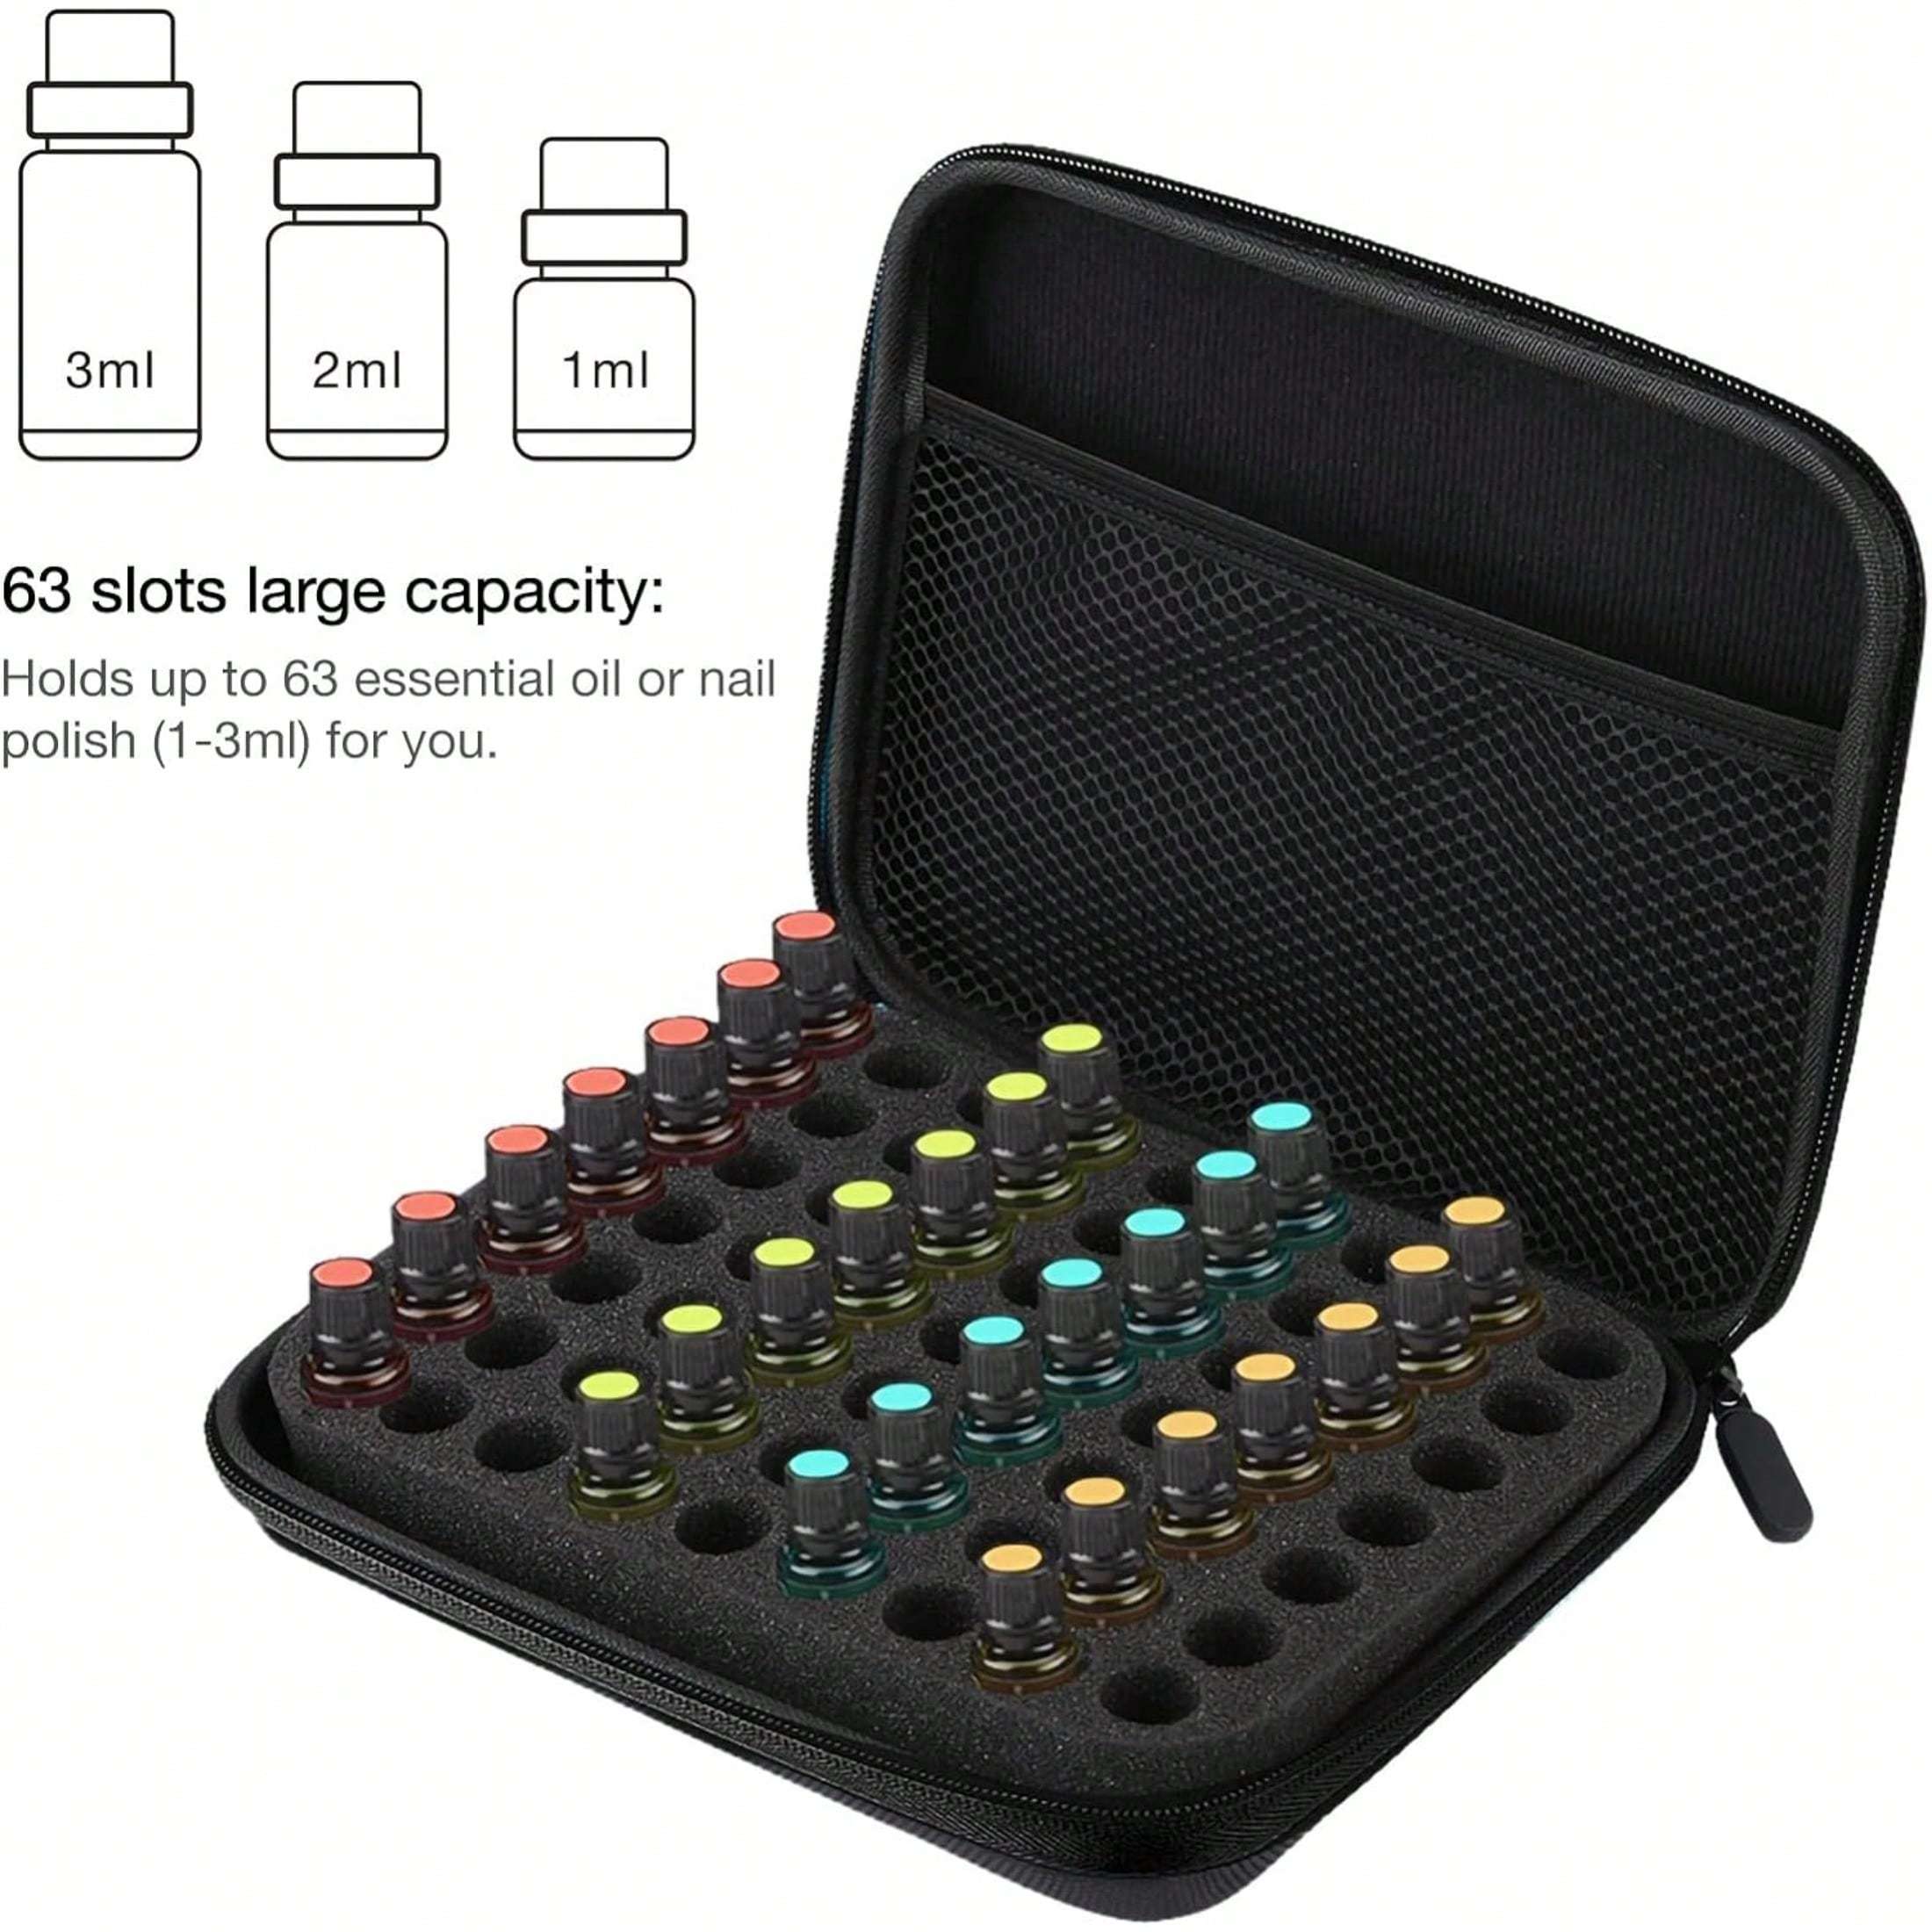 

Essential Oil Storage Holder Organizer Carrying Case, Essential Oils Box Holds 63 Bottles For Young Living Oils, Essential Oil Travel Bag, 8.5x6.8x1.9 Inch